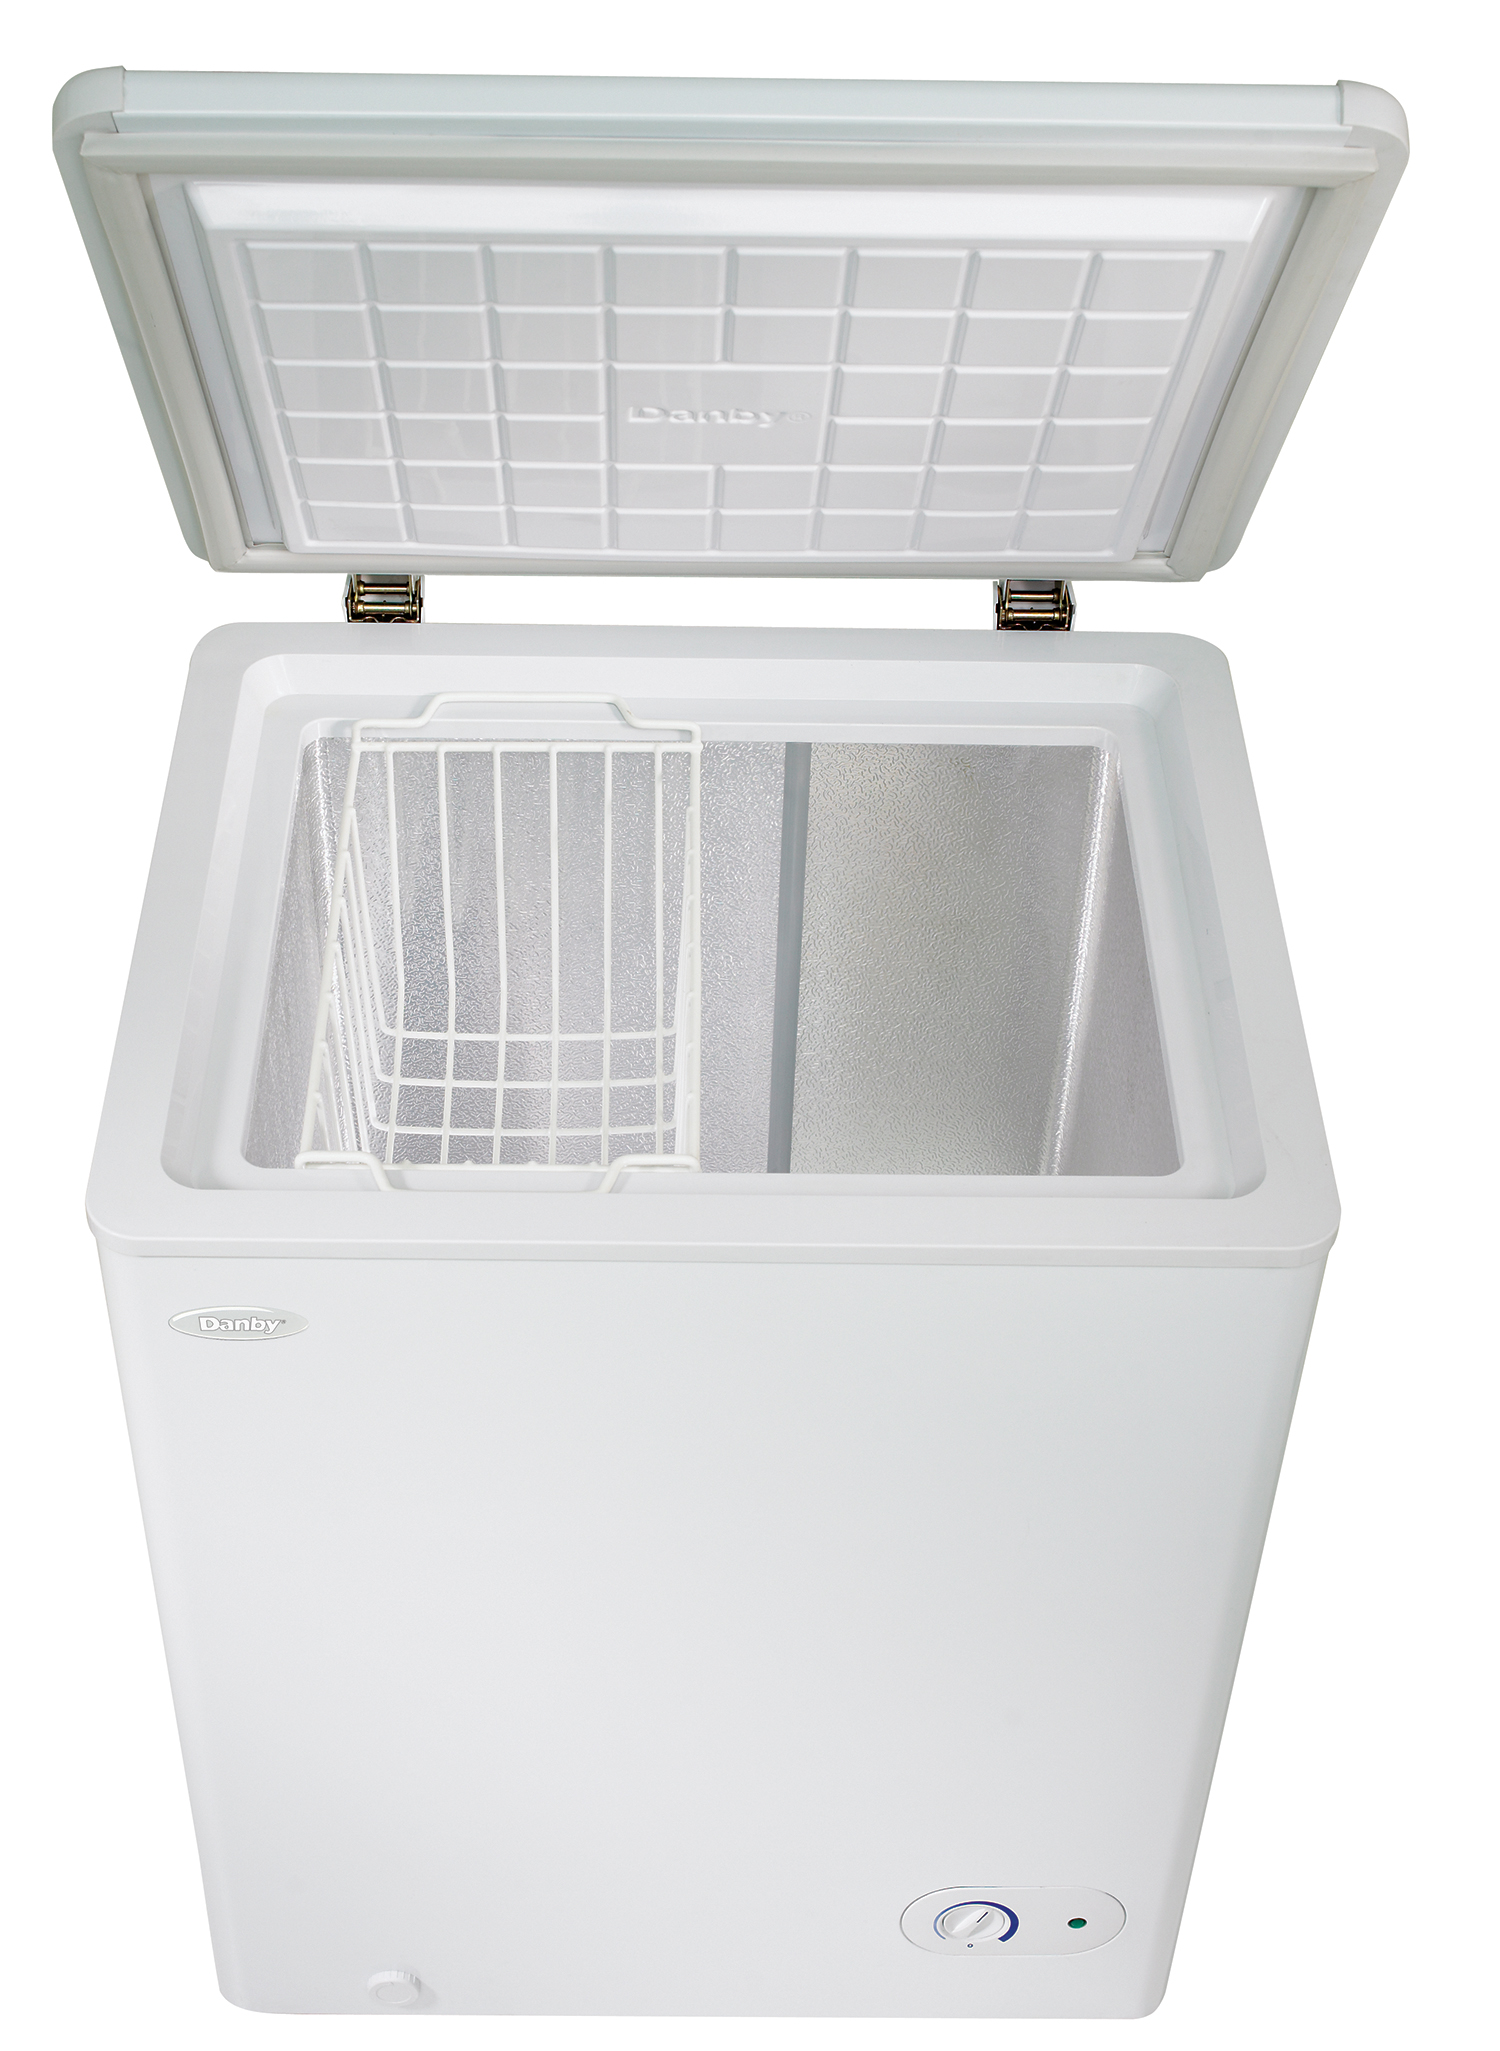 White Danby 93 L Compact Chest Freezer with Front-Mounted Mechanical Thermostat Easy Reach Basket and Energy Saving Foam Insulation Quiet Operation and Energy Efficient 